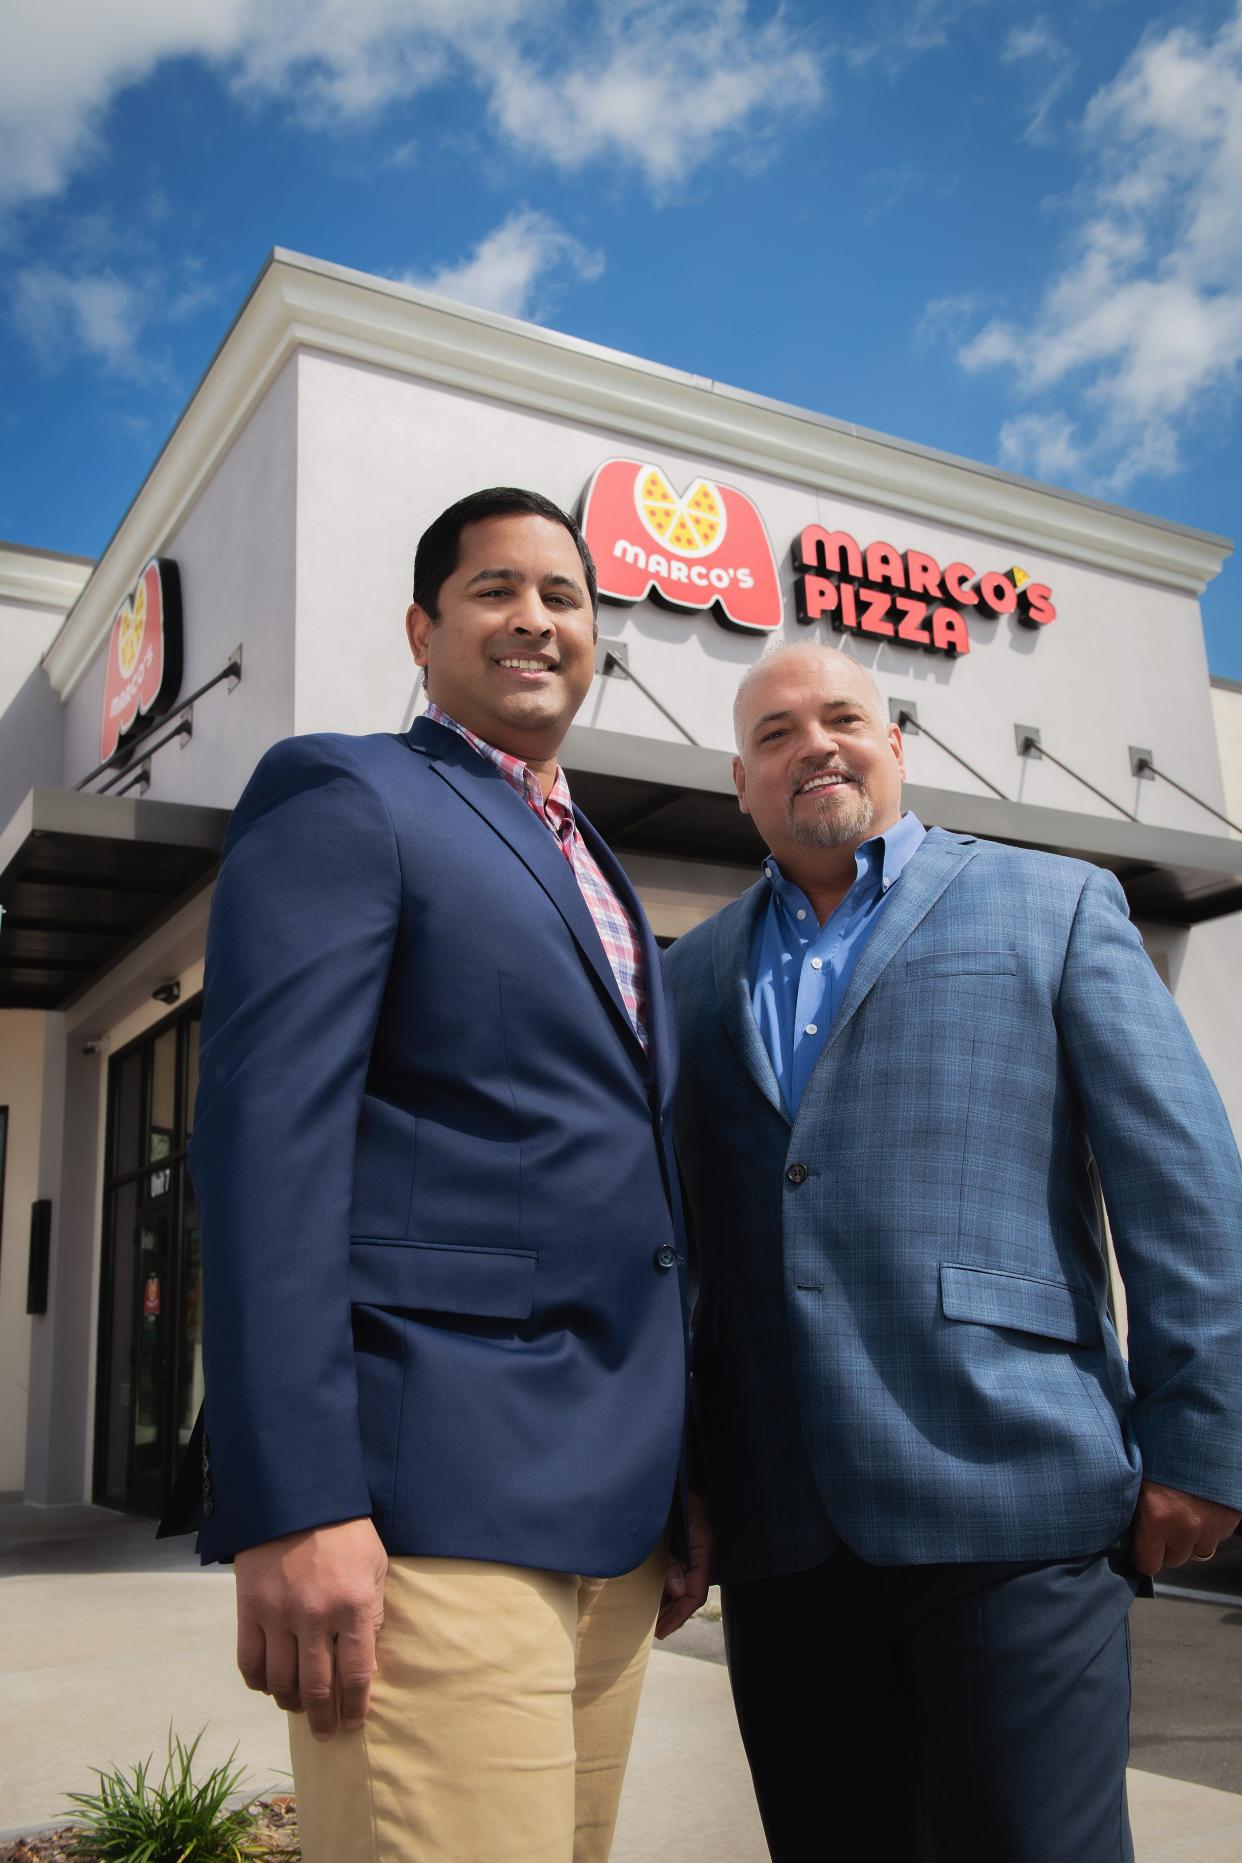 Kal Gullapalli and his team hope to open 100 Marco's Pizza restaurants by 2025.